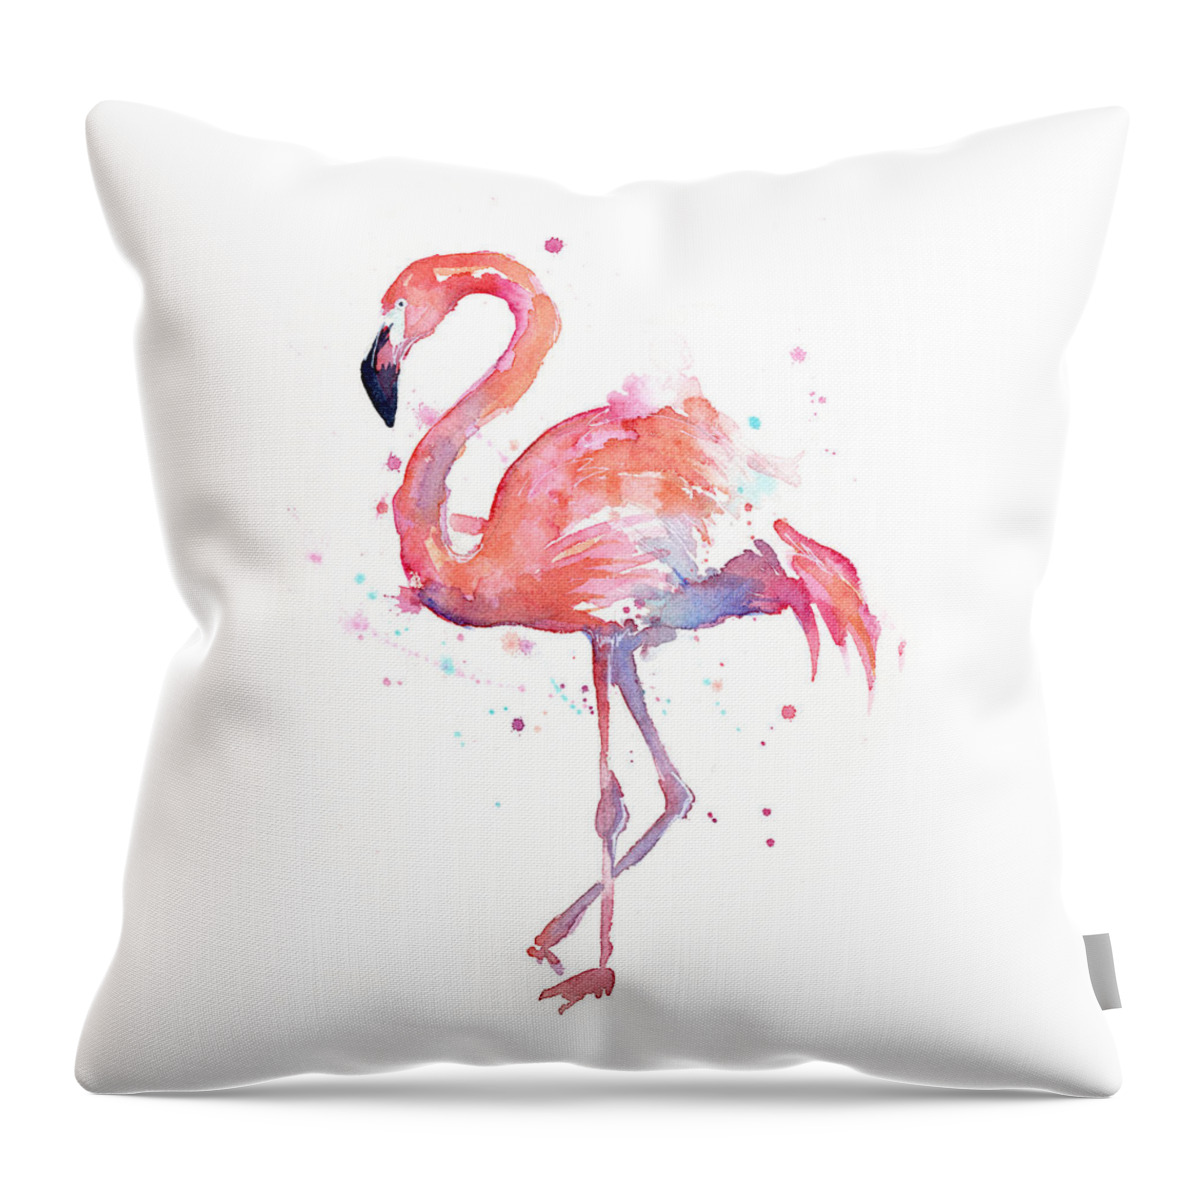 #faatoppicks Throw Pillow featuring the painting Flamingo Watercolor by Olga Shvartsur